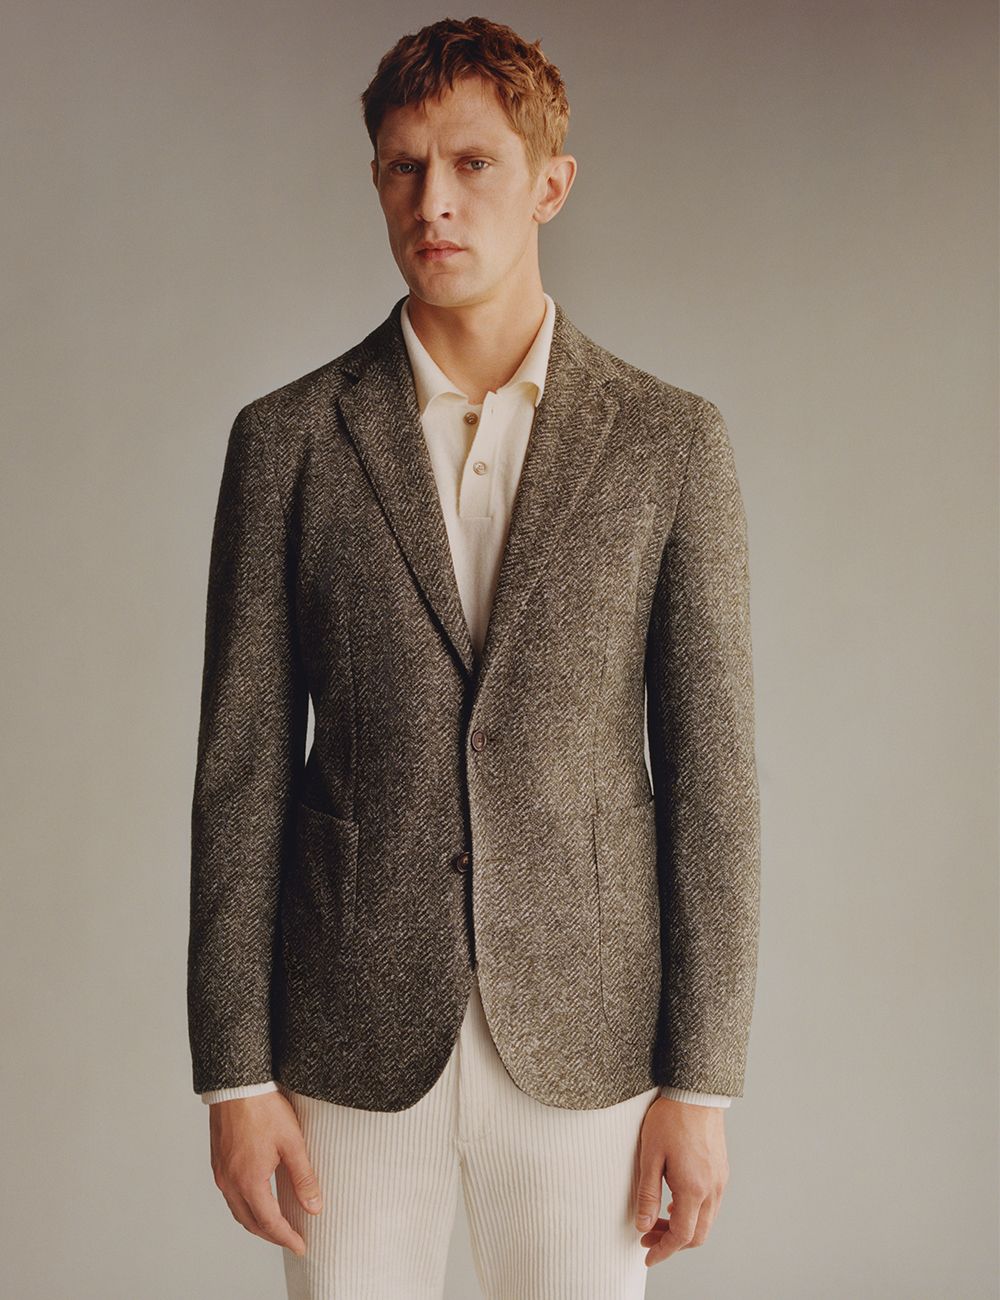 Mango Designed by Boglioli is First-Class Affordable Tailoring